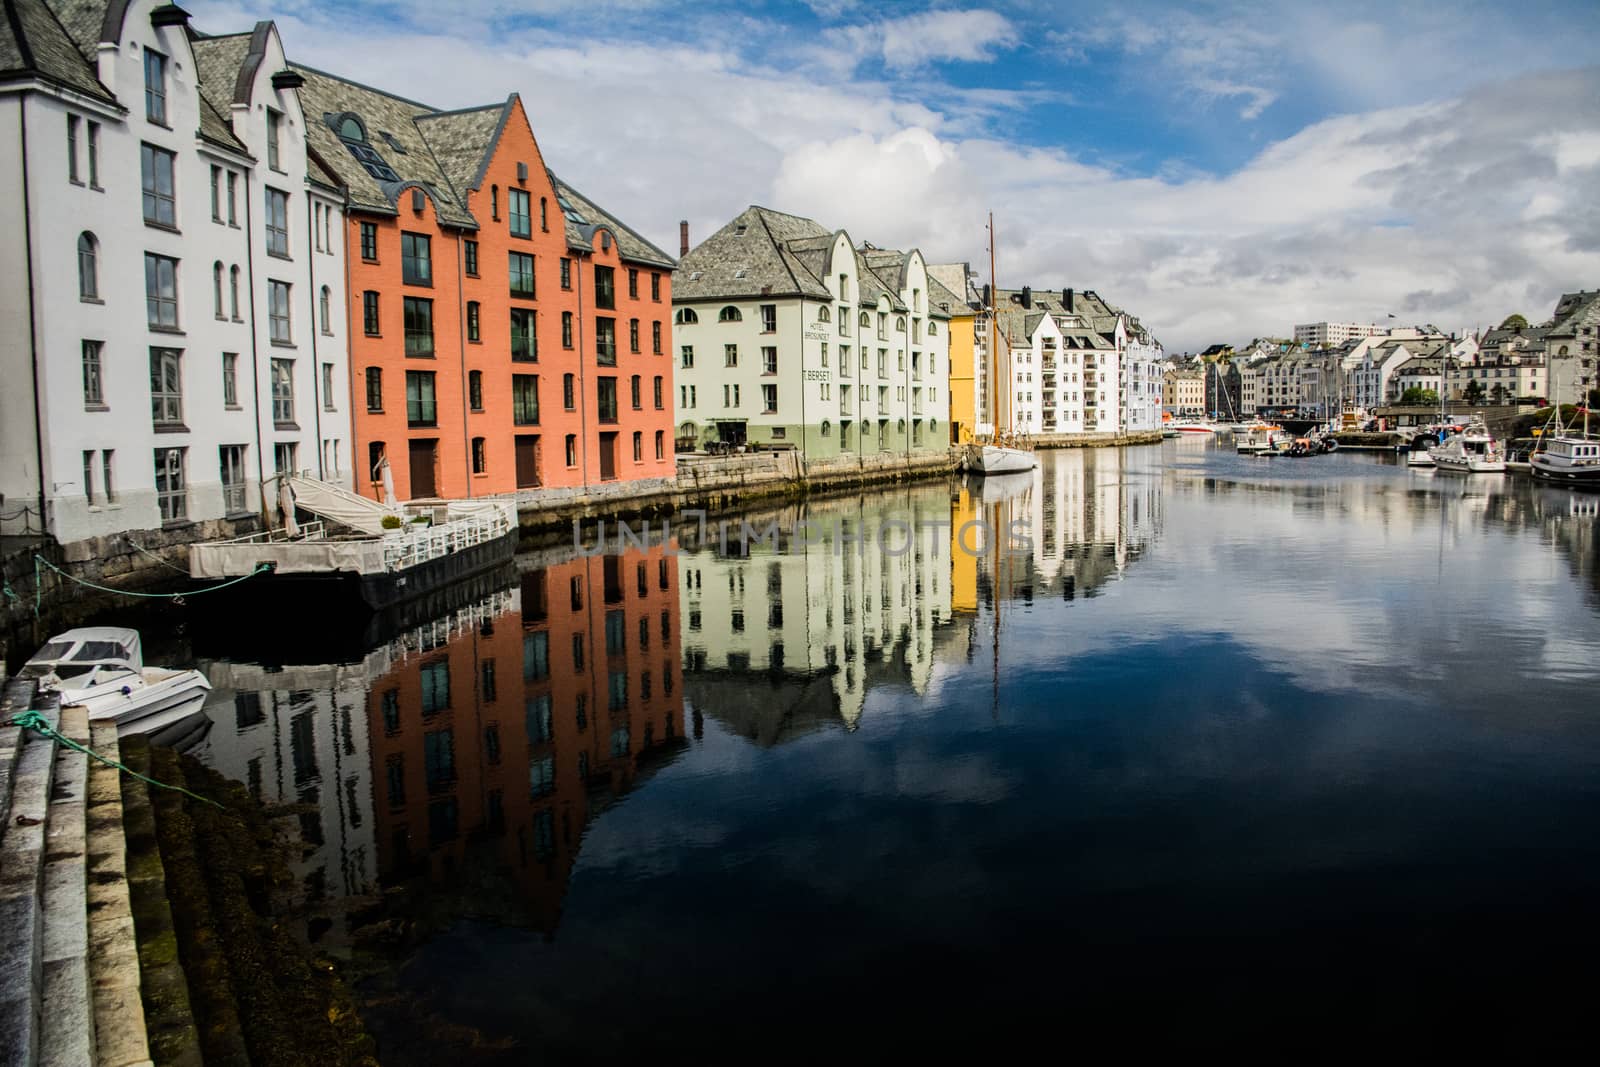 Alesund, Norway, May 2015: historical houses on the canal of the city